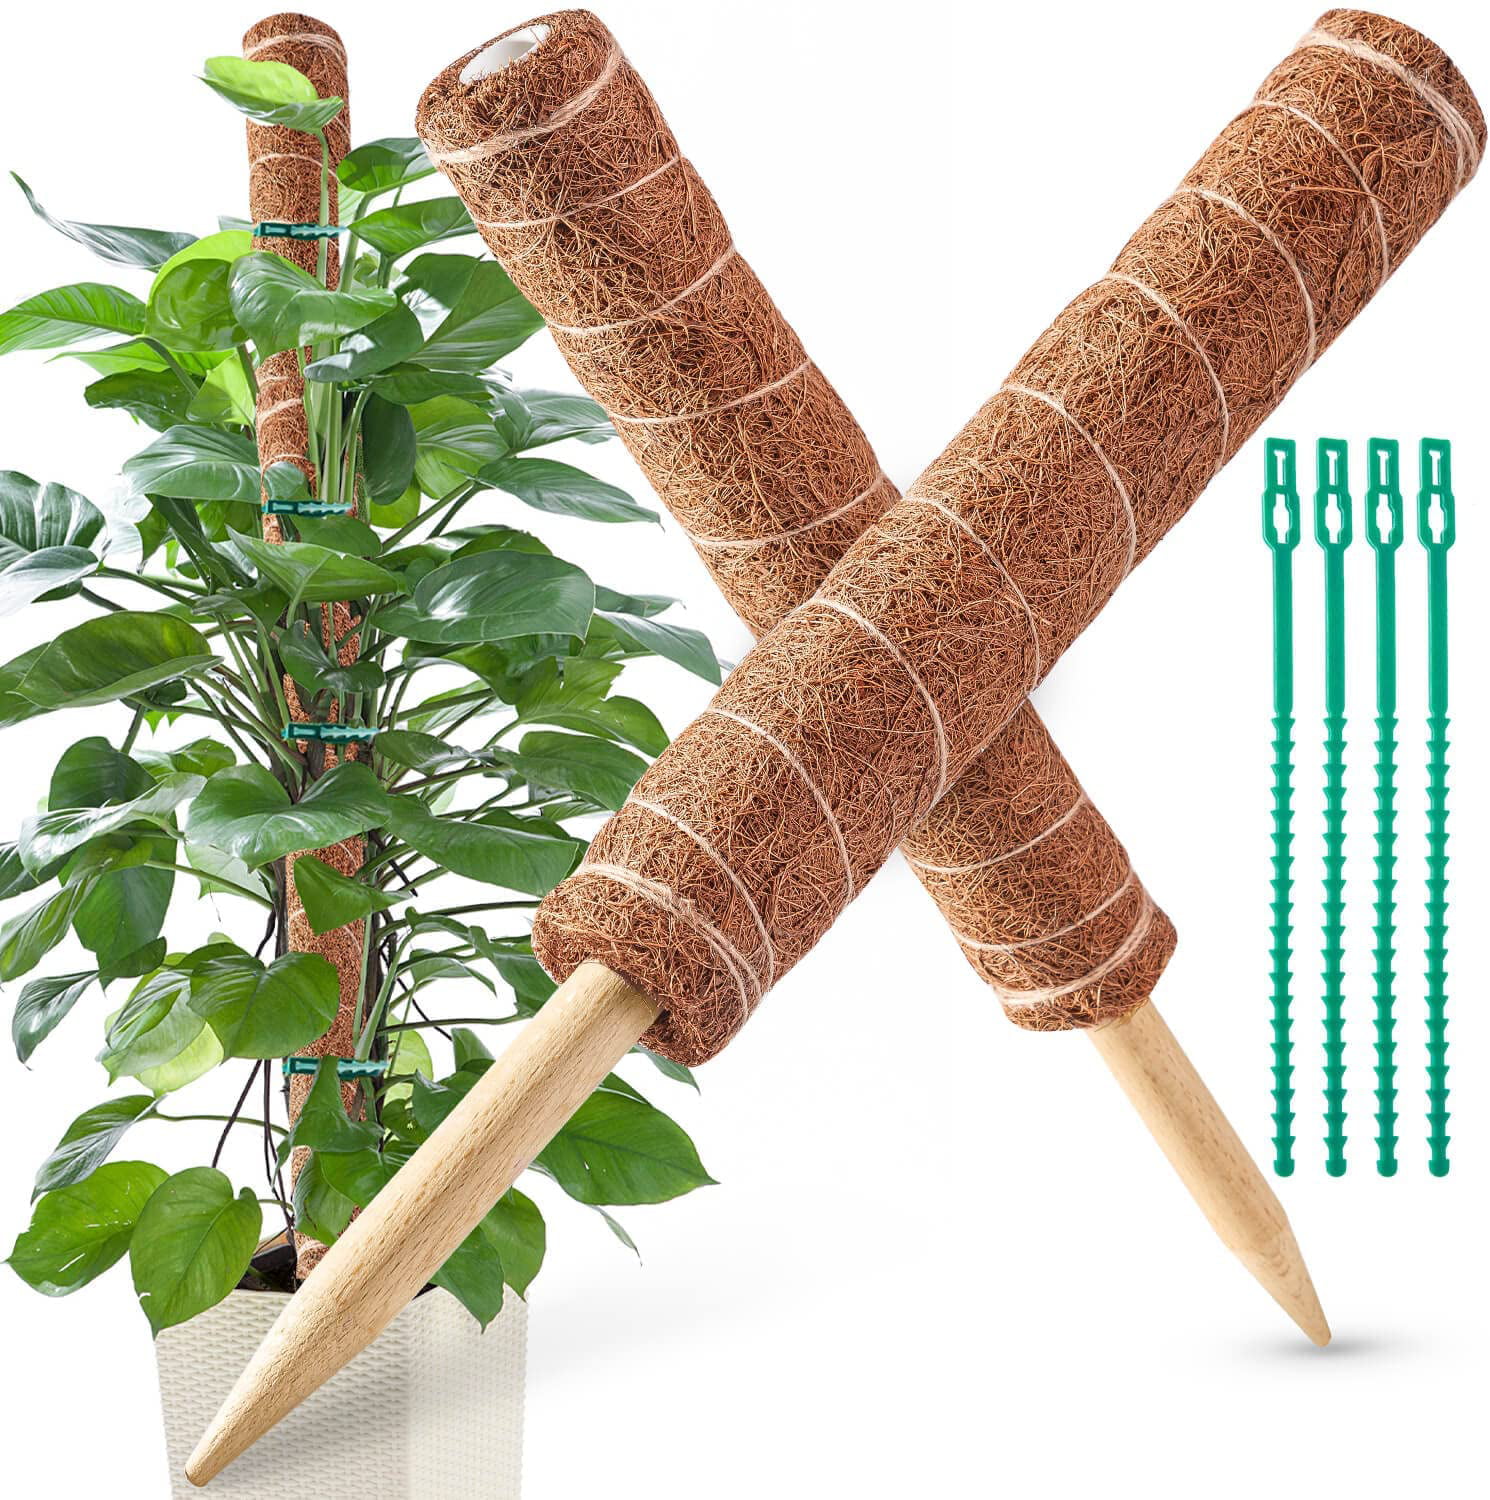 2x Climbing Totem Pole Plant Support Indoor Climbing Plants Stake Sphagnum Moss 